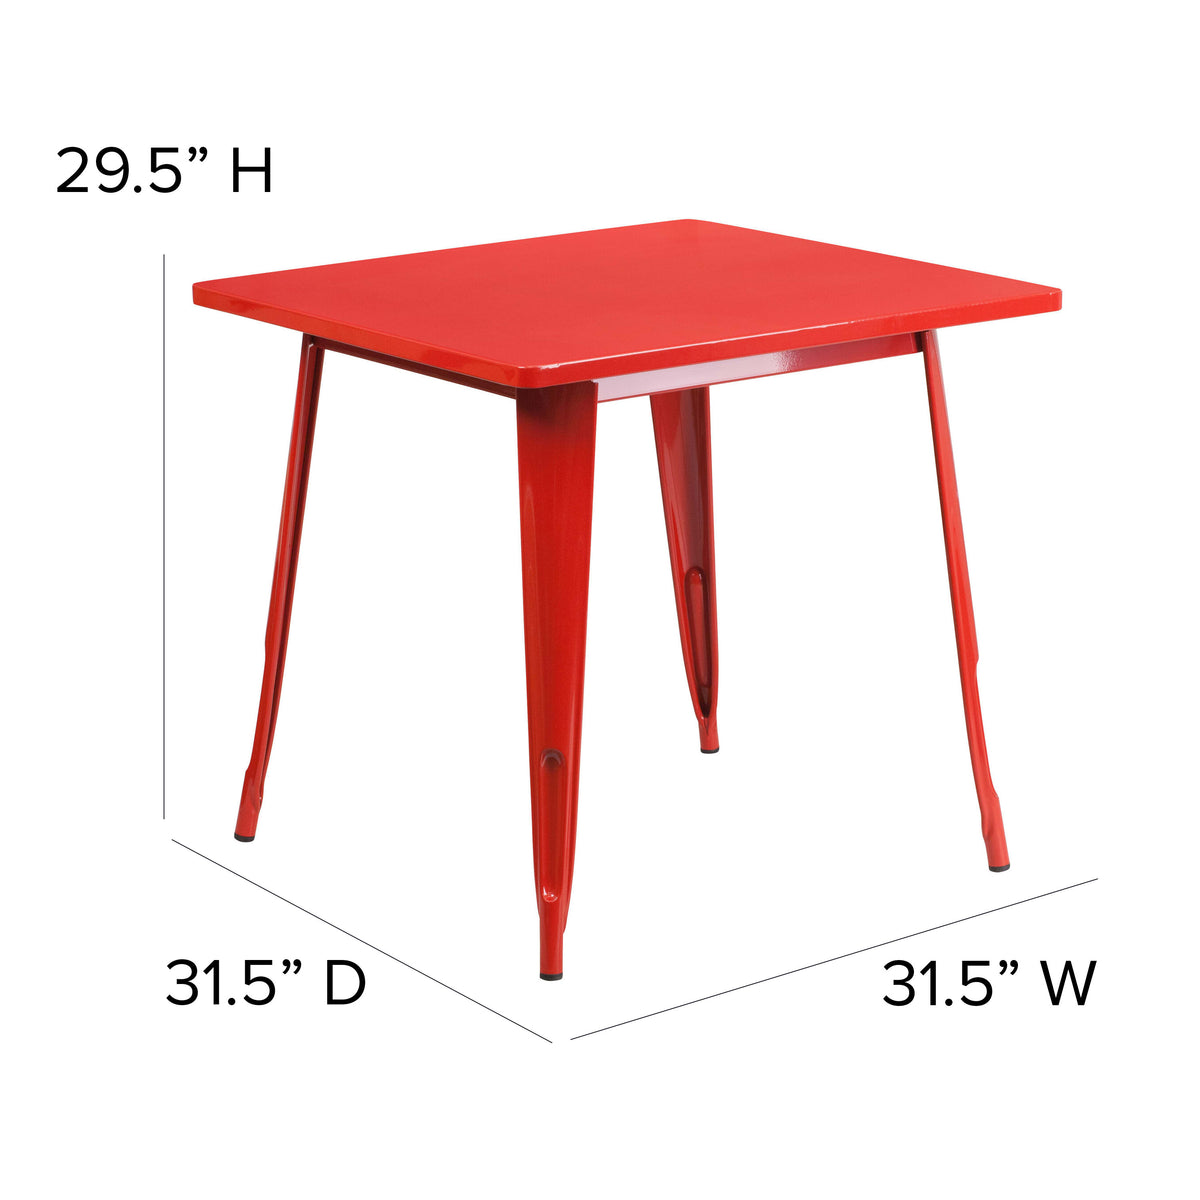 Red |#| 31.5inch Square Red Metal Indoor-Outdoor Table - Hospitality Furniture